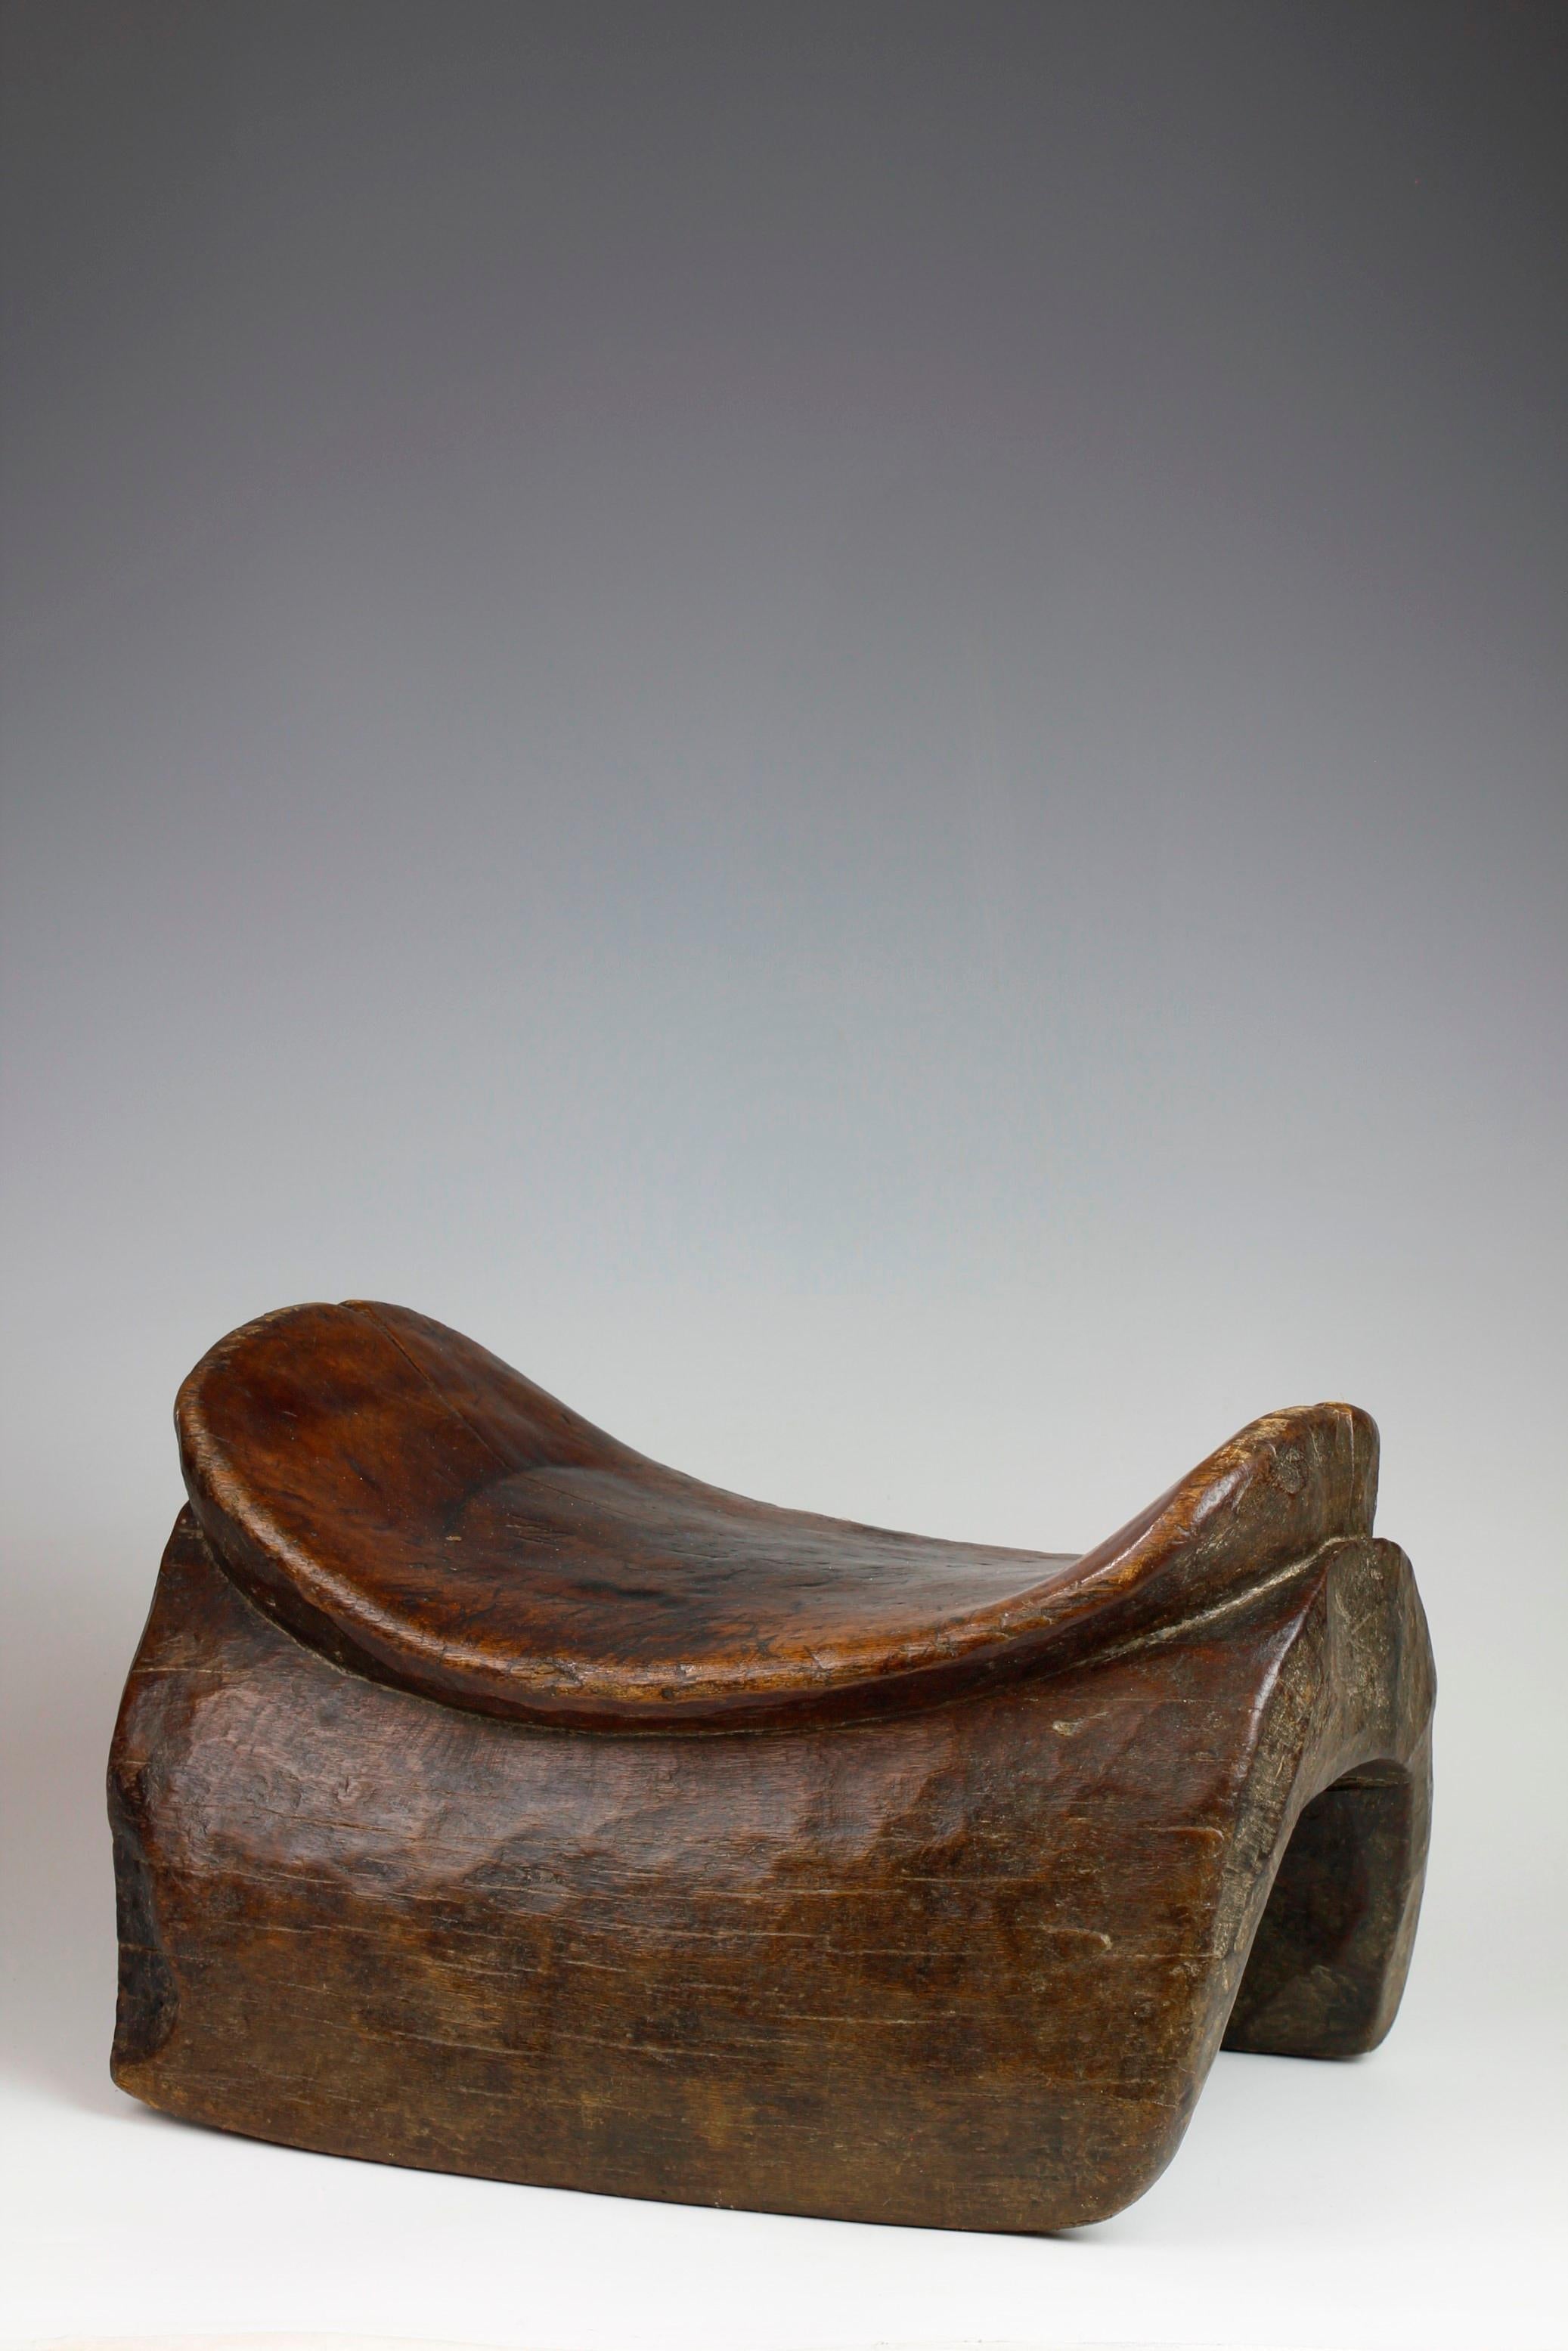 This stool is a beautiful example of an Arsi saddle-shaped stool from the Oromia region of Ethiopia. Finely carved into this form from dense, heavy brown wood, this stool has developed a lovely rich surface patina as a result of use over